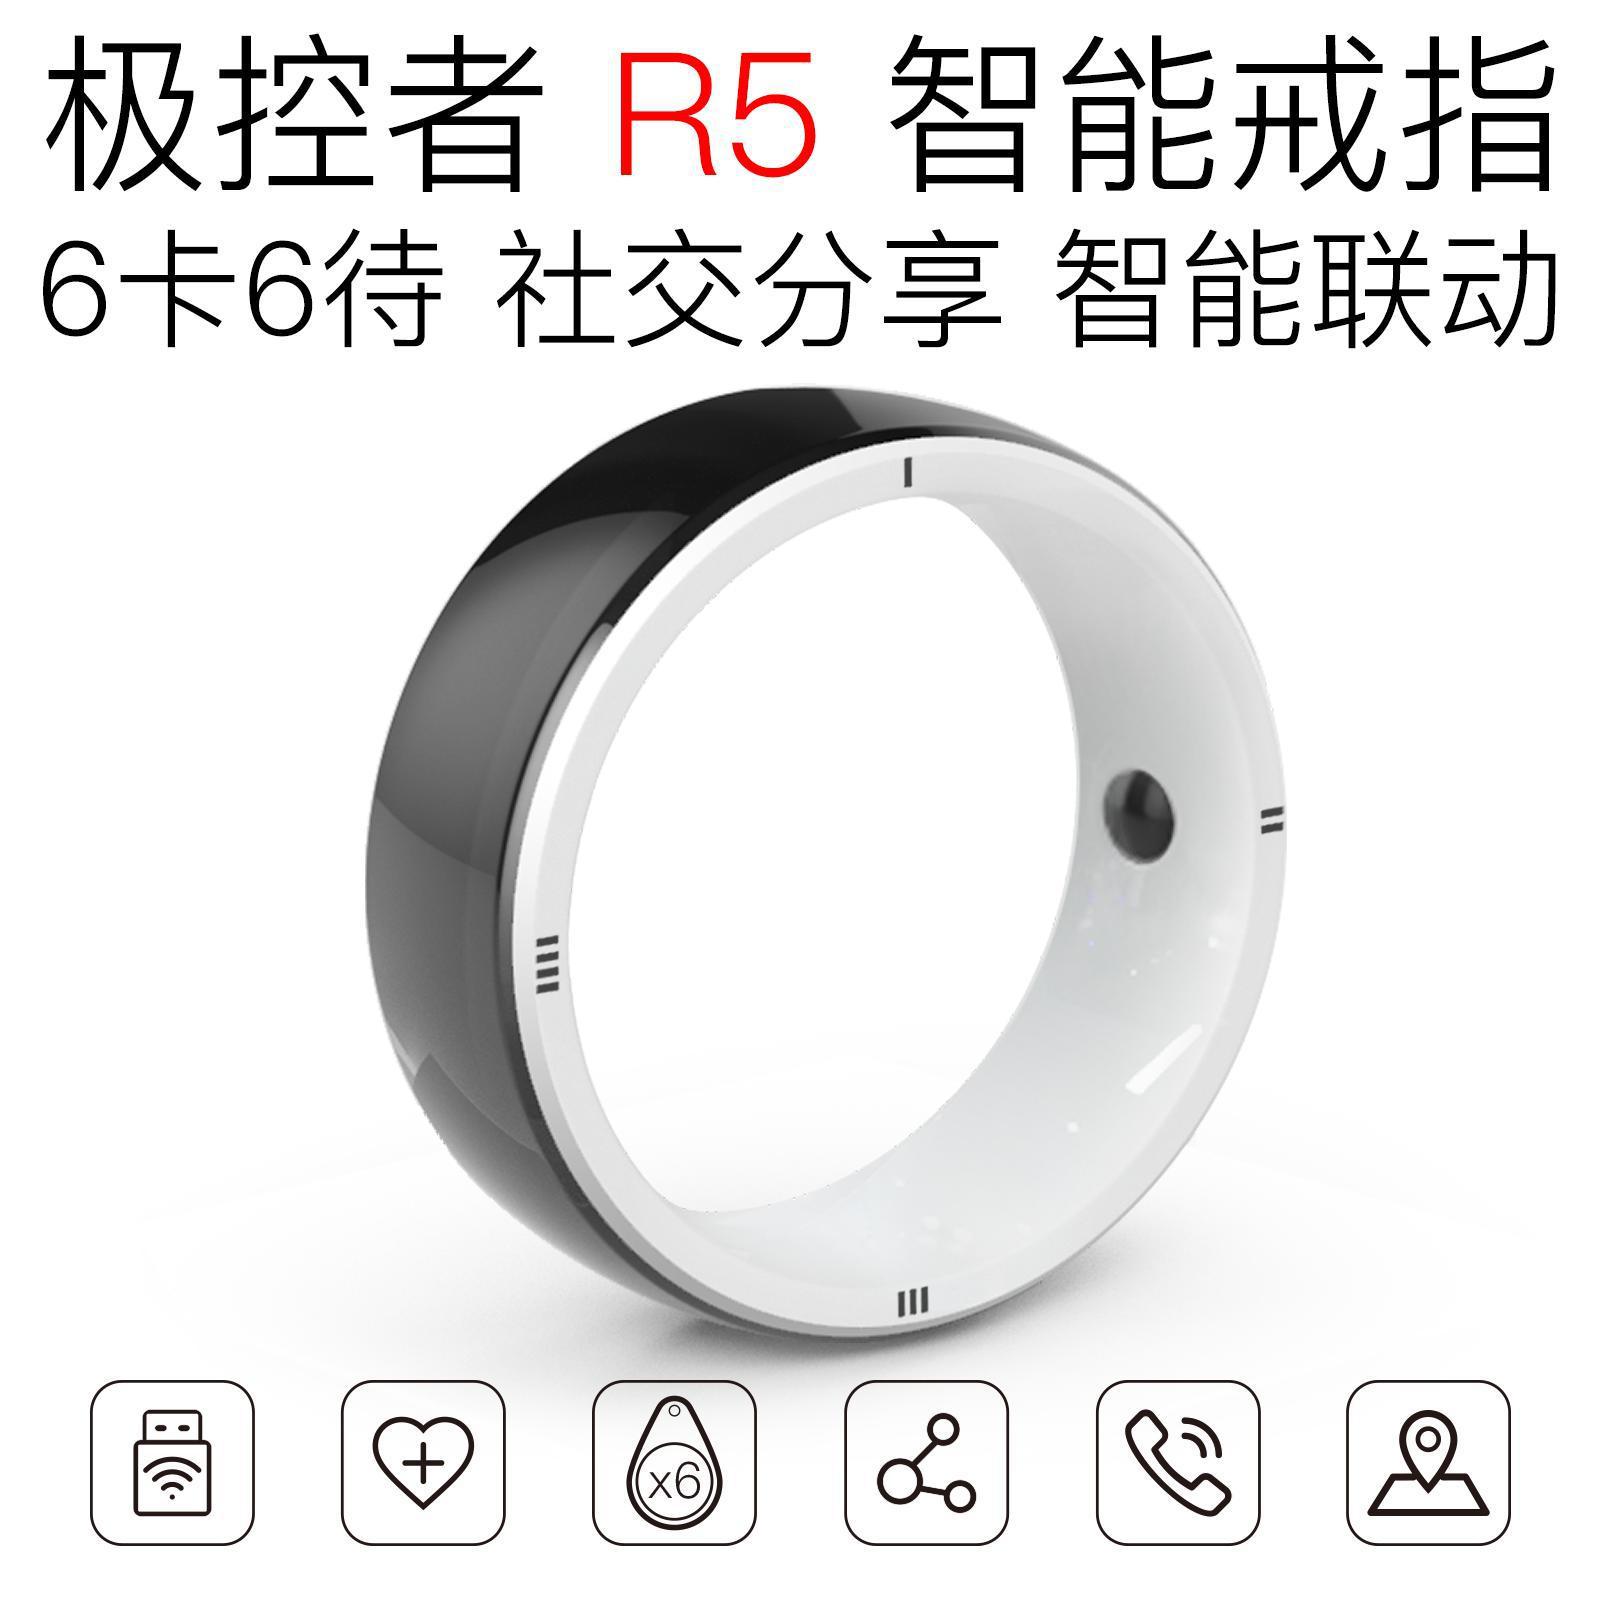 R5 Smart Ring Applicable to extreme controllers NFCJAKCOM watch B3JAKCOMOS2